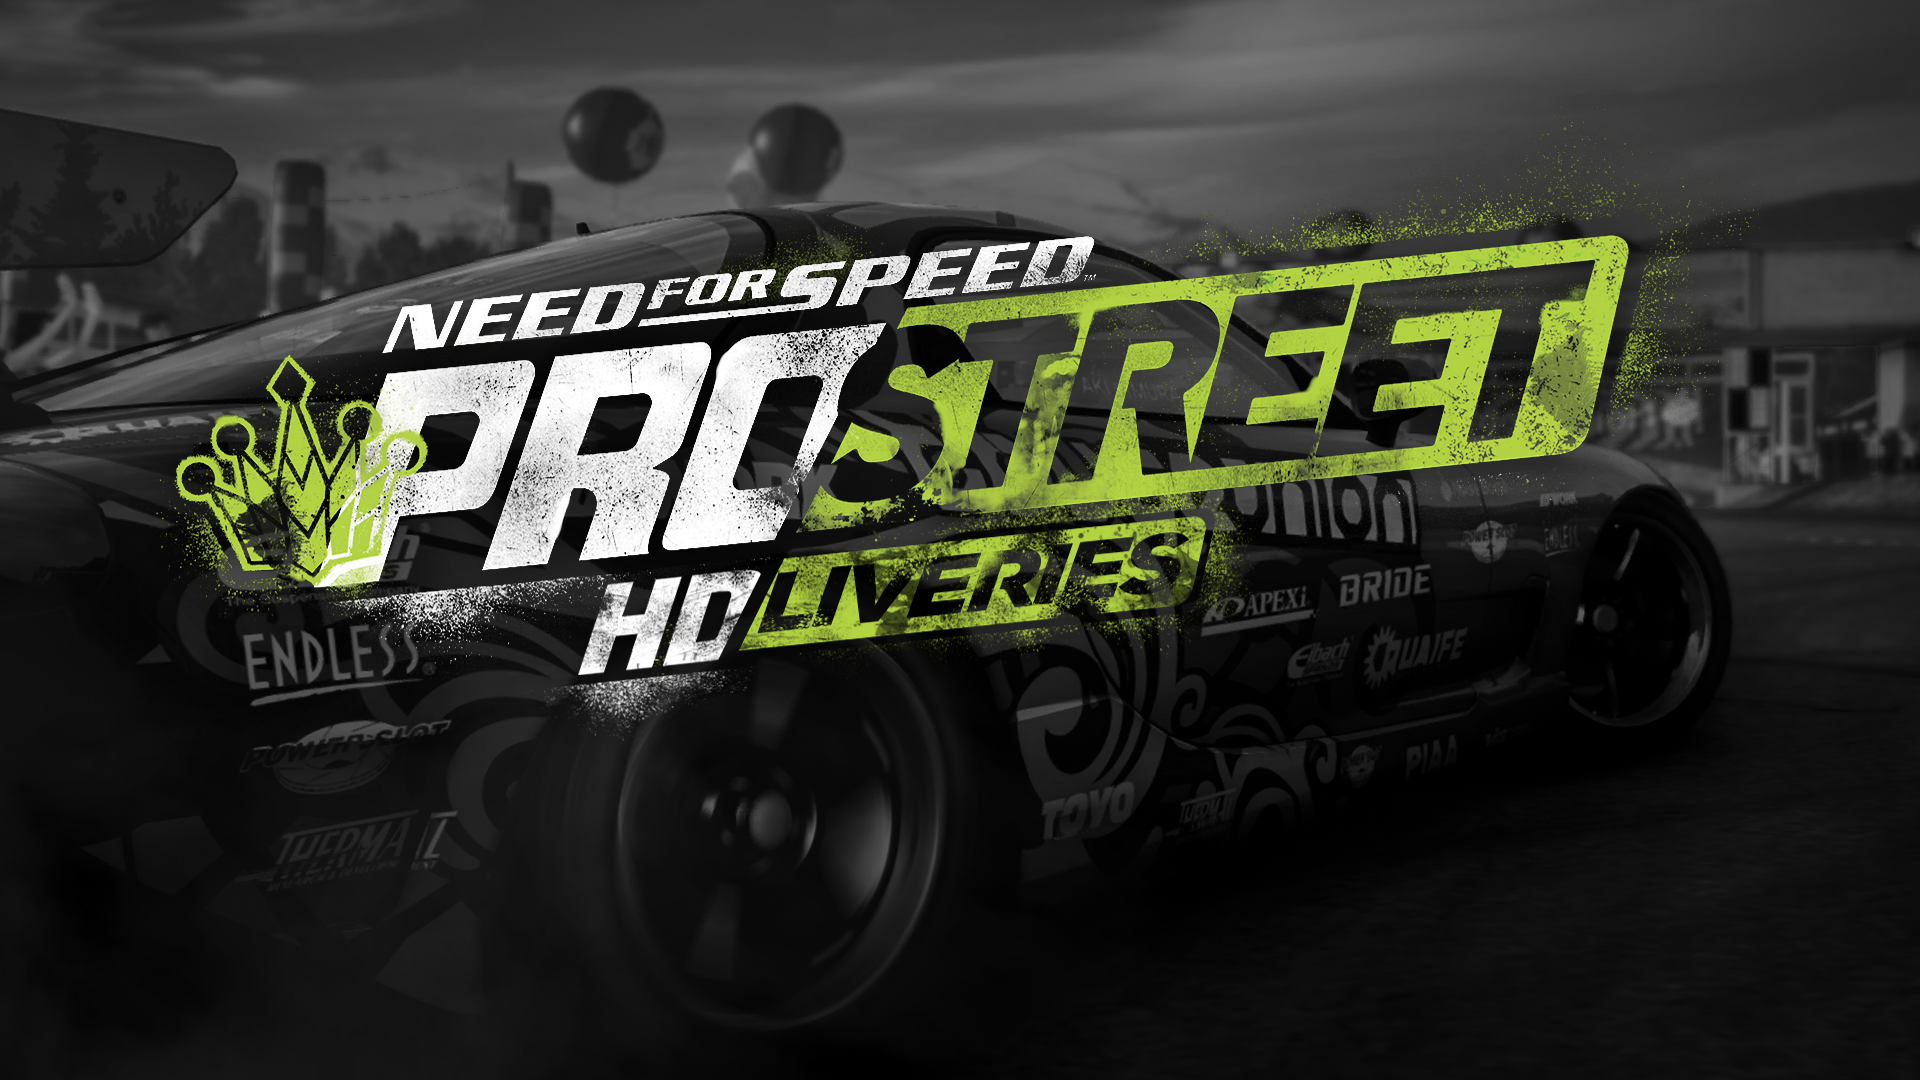 HOW TO JOIN OUR PROSTREET DISCORD